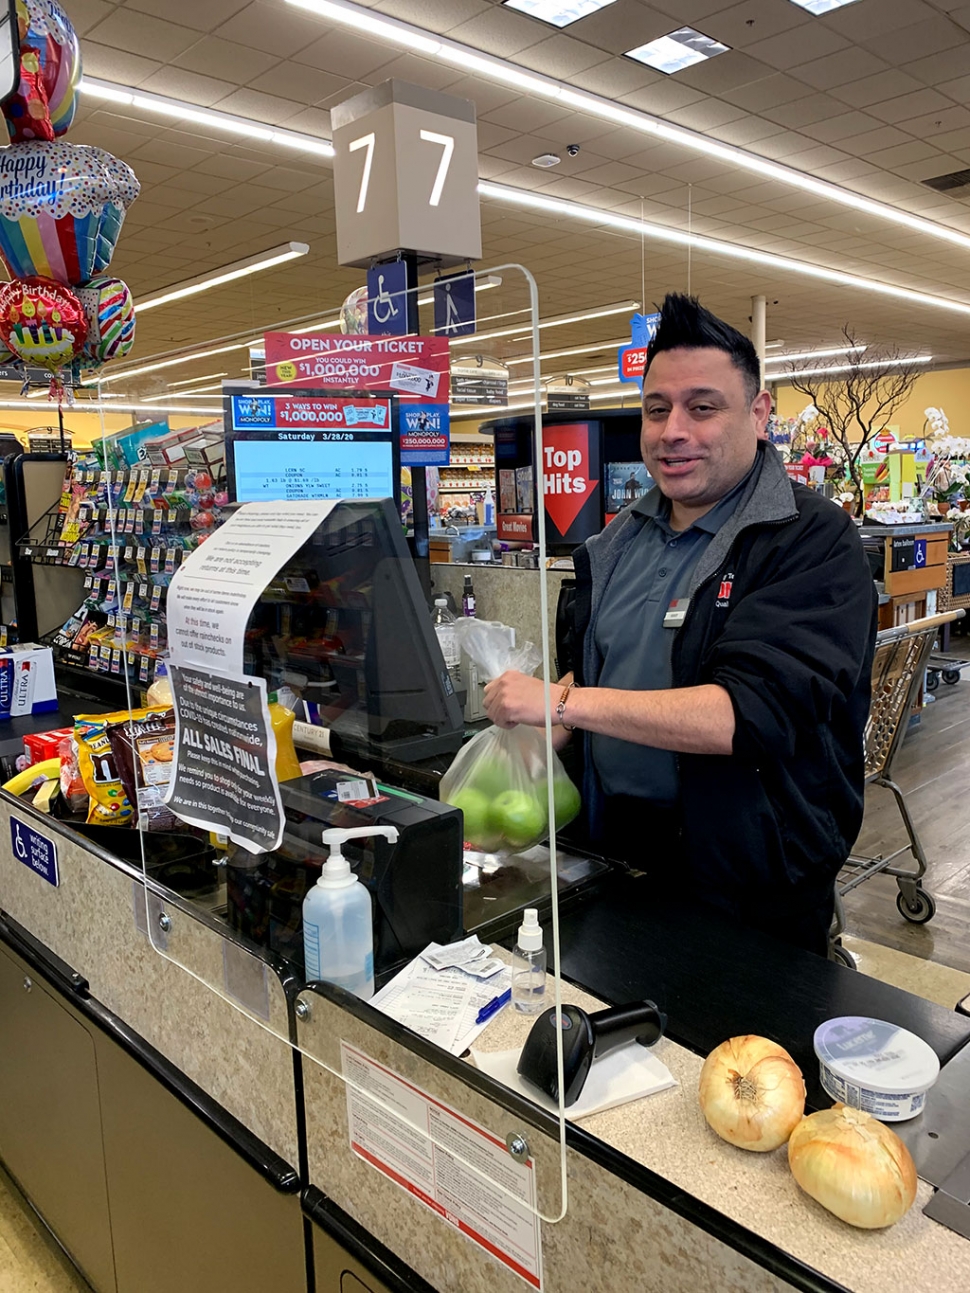 Vons has installed plexiglass sneeze guards at each cashiers’ station to help stop any spread of the COVID-19 virus.